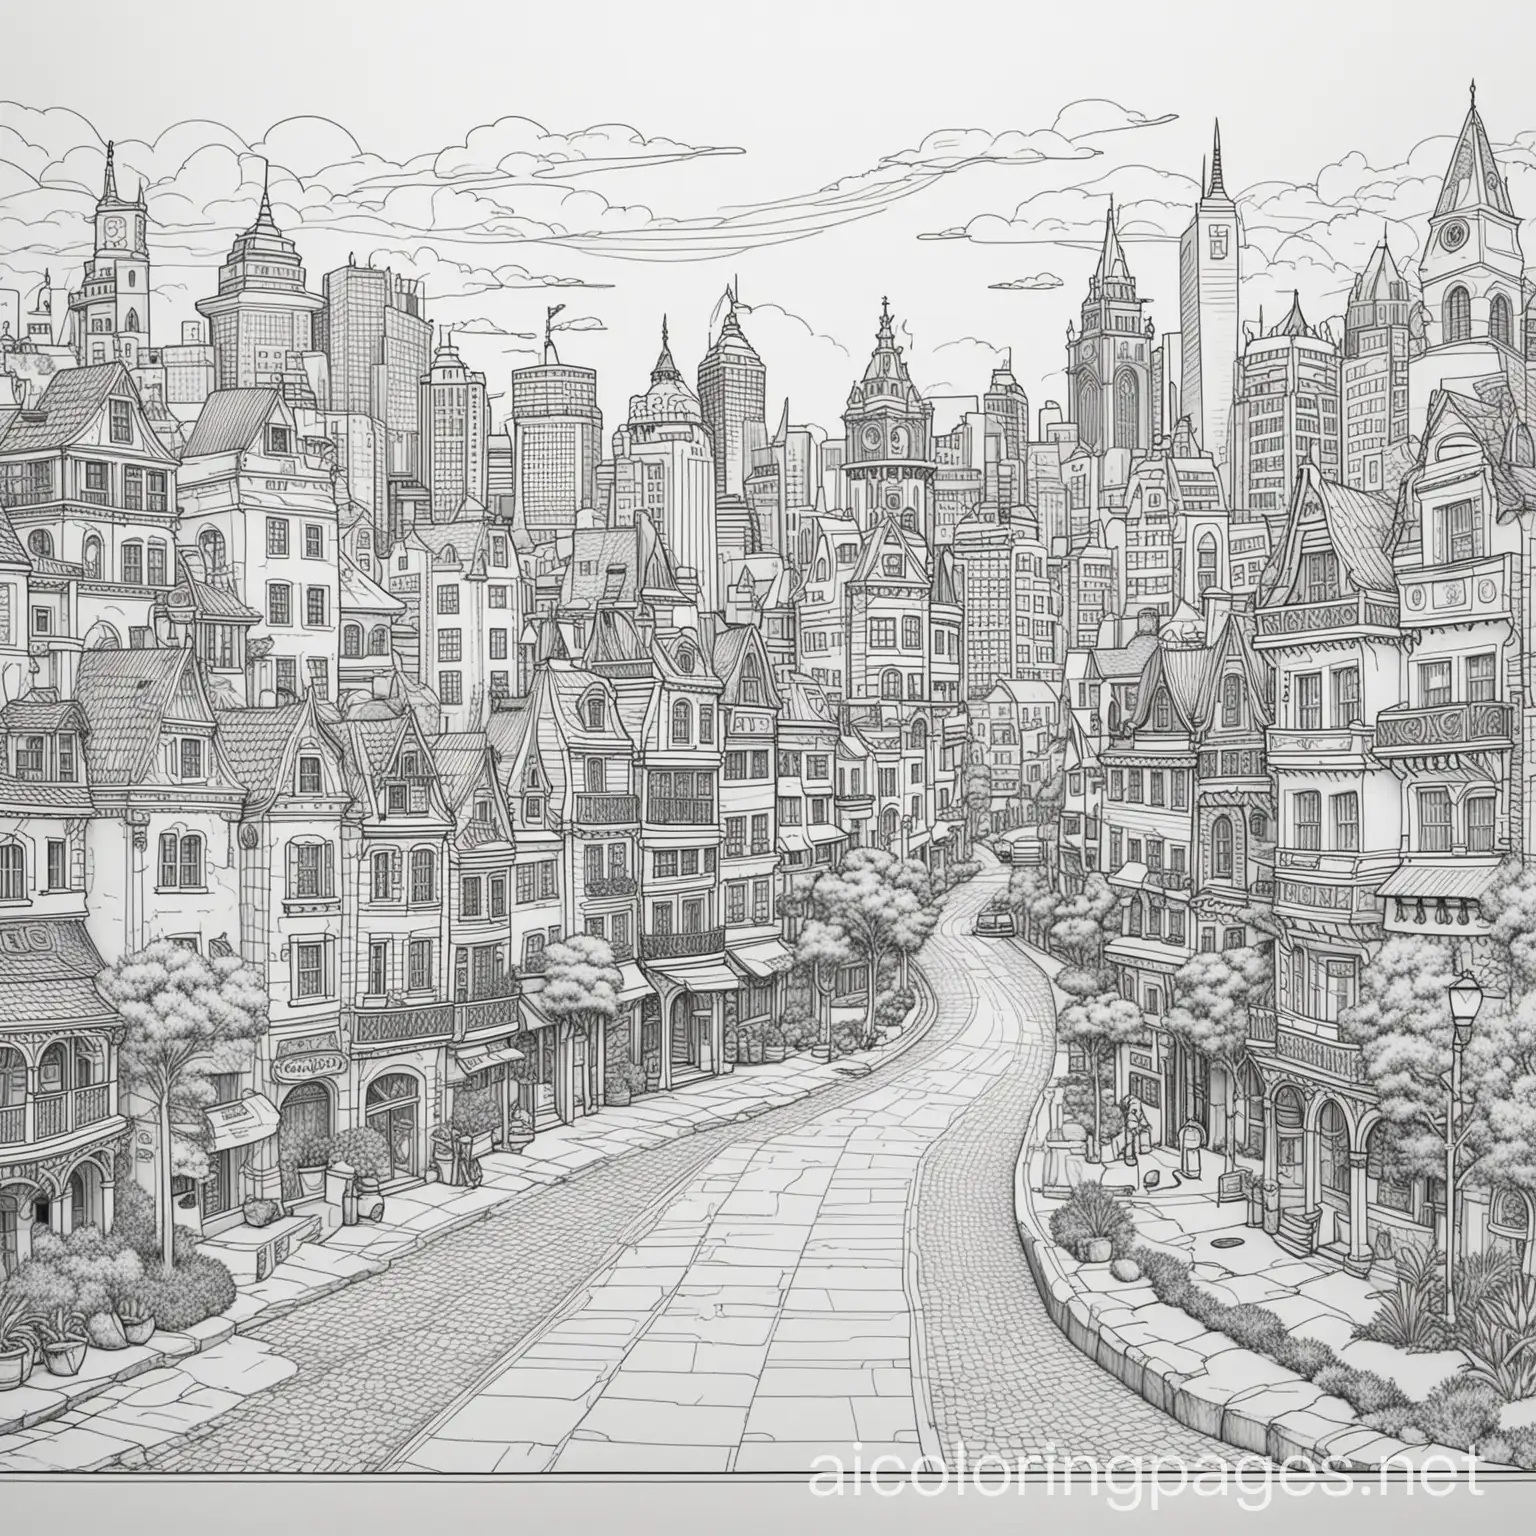 Sydney as a fantasy city, Coloring Page, black and white, line art, white background, Simplicity, Ample White Space. The background of the coloring page is plain white to make it easy for young children to color within the lines. The outlines of all the subjects are easy to distinguish, making it simple for kids to color without too much difficulty